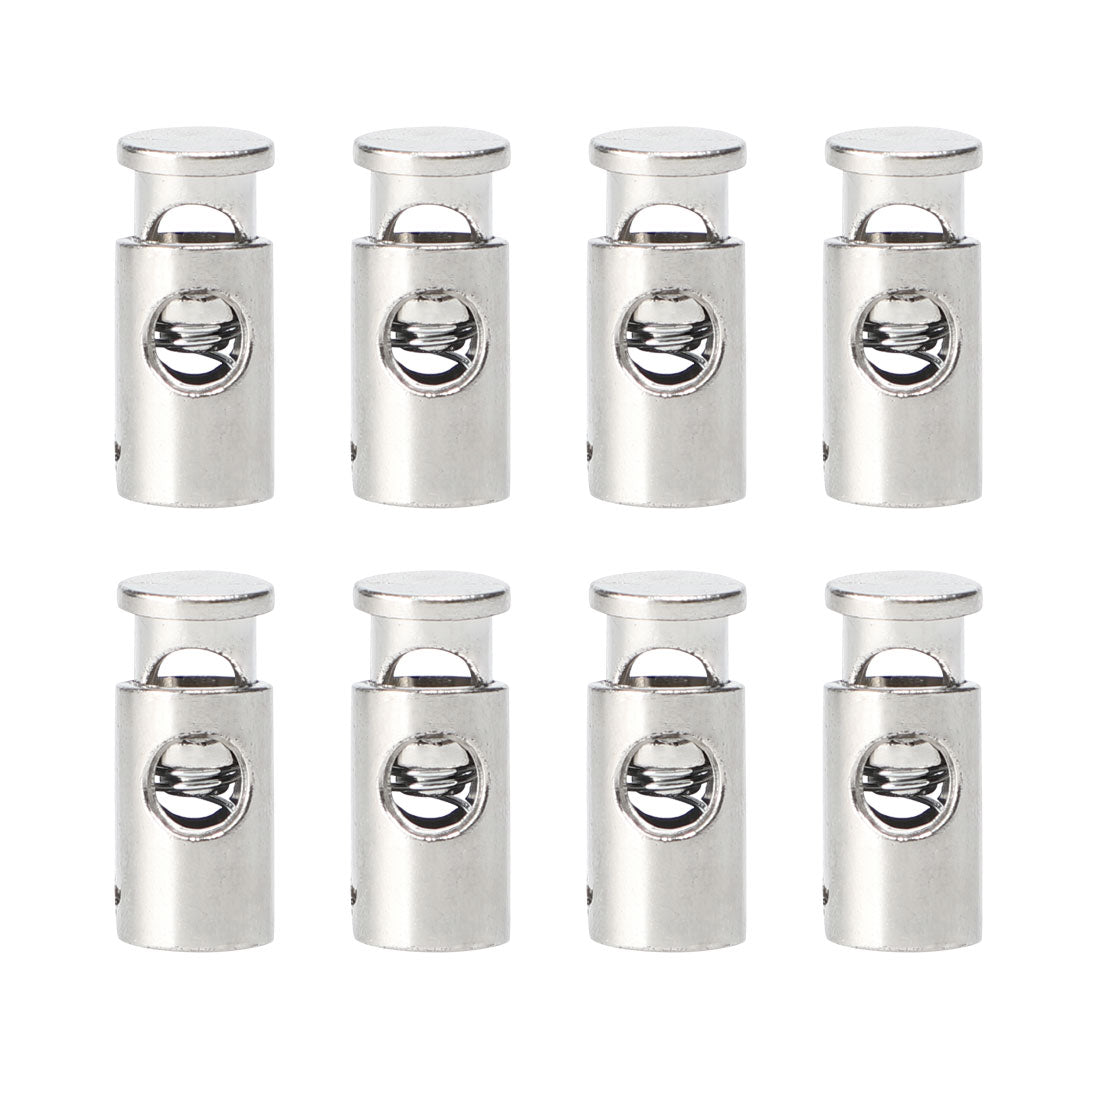 uxcell Uxcell 8pcs Plastic Cord Lock Stoppers Spring Toggle Fastener Organizer Silver Tone